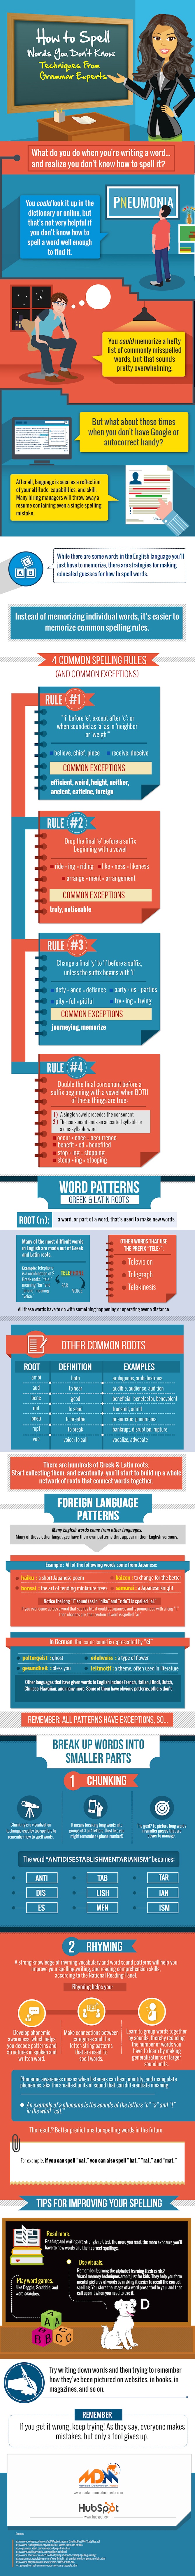 spelling-tips-infographic